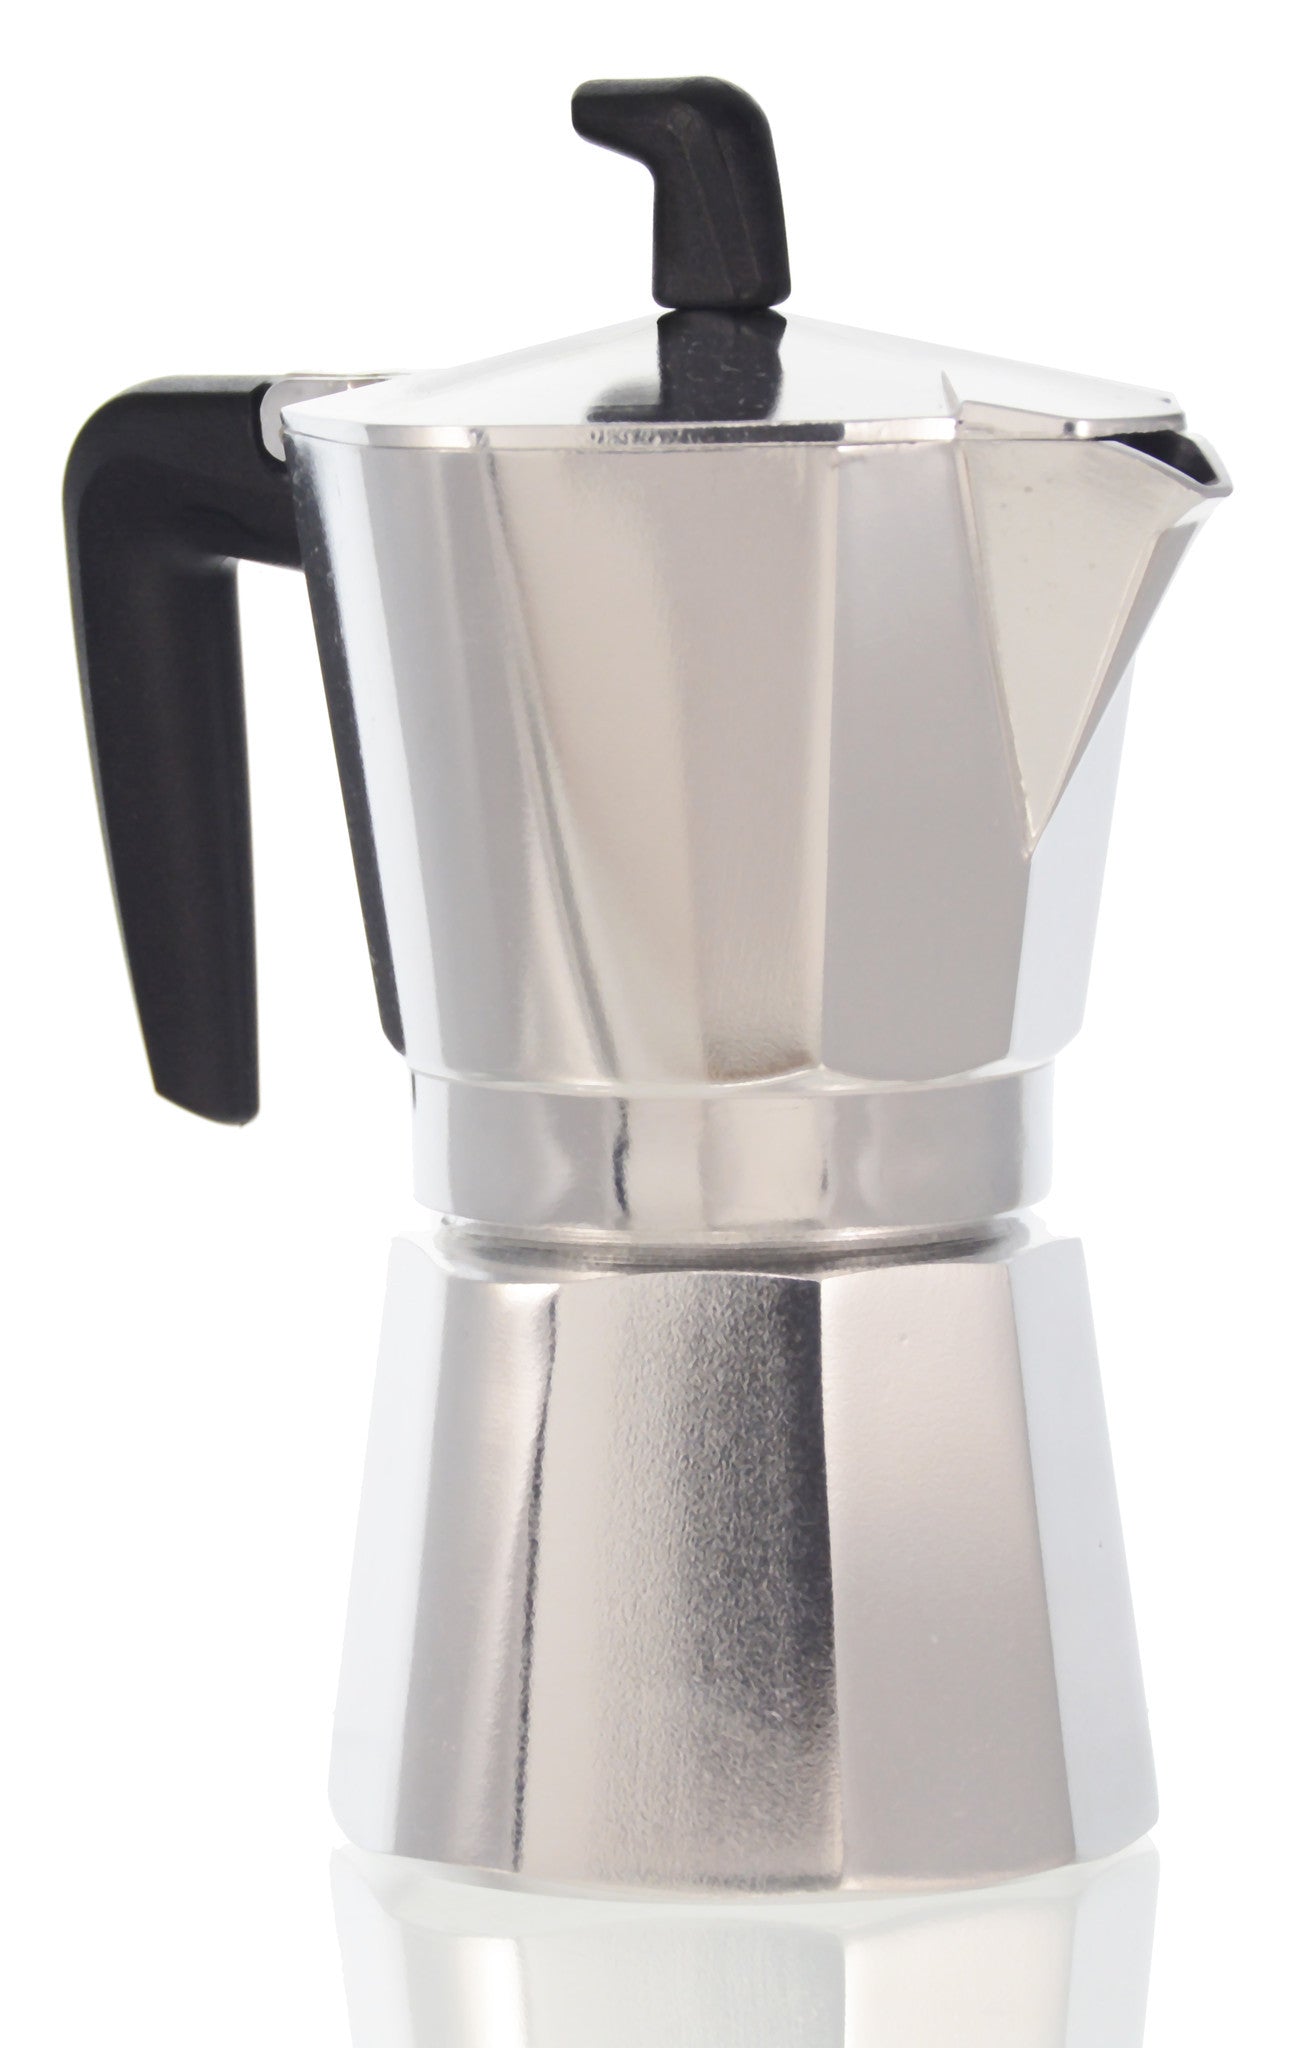 Pedrini Italy Sei Moka Stovetop Espresso Maker with Marble or Silver Finish  1 cup, 2 cup, 3 cup, 6 cup 